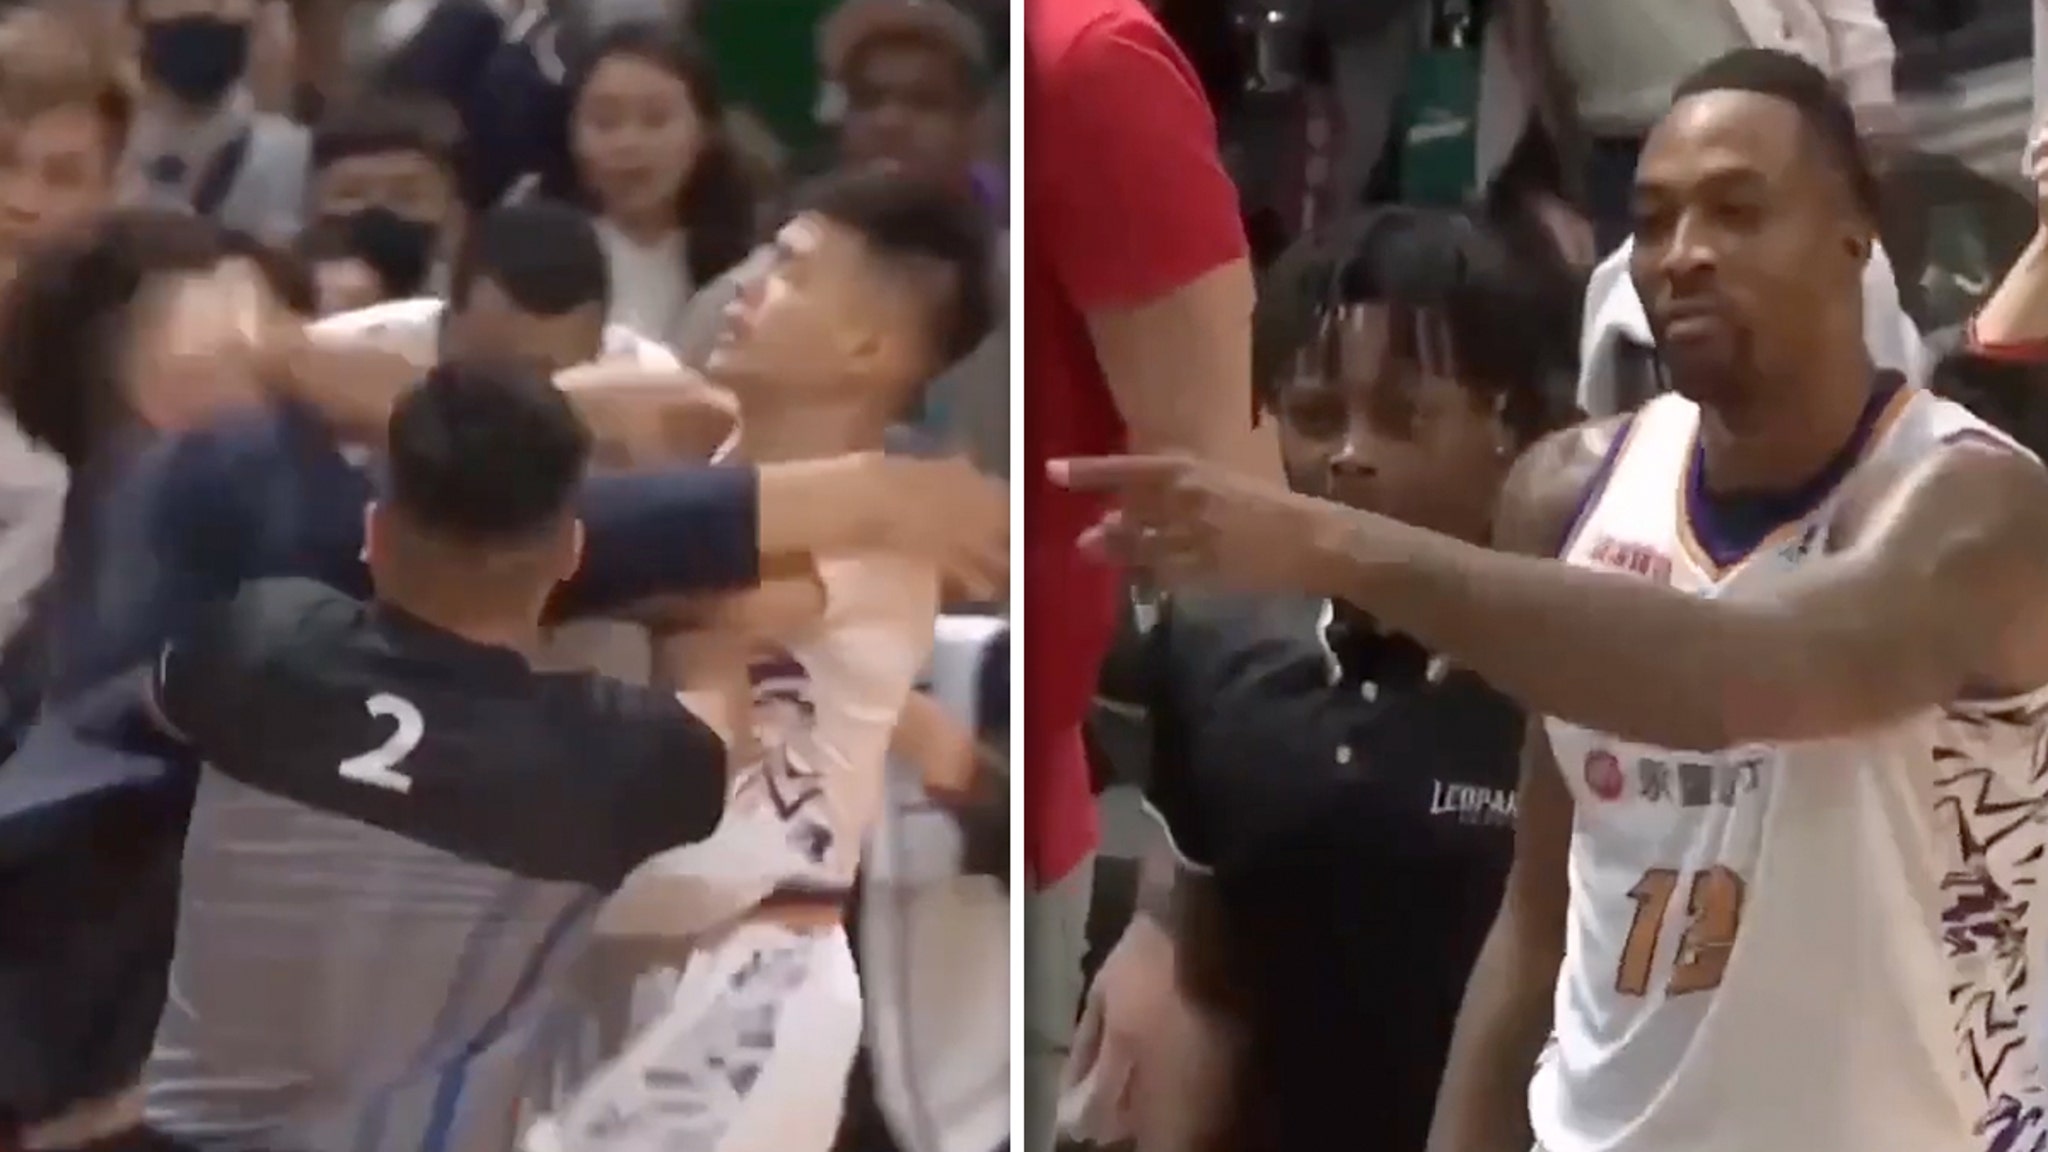 Dwight Howard Ejected After Wild Skirmish In Taiwan League Game